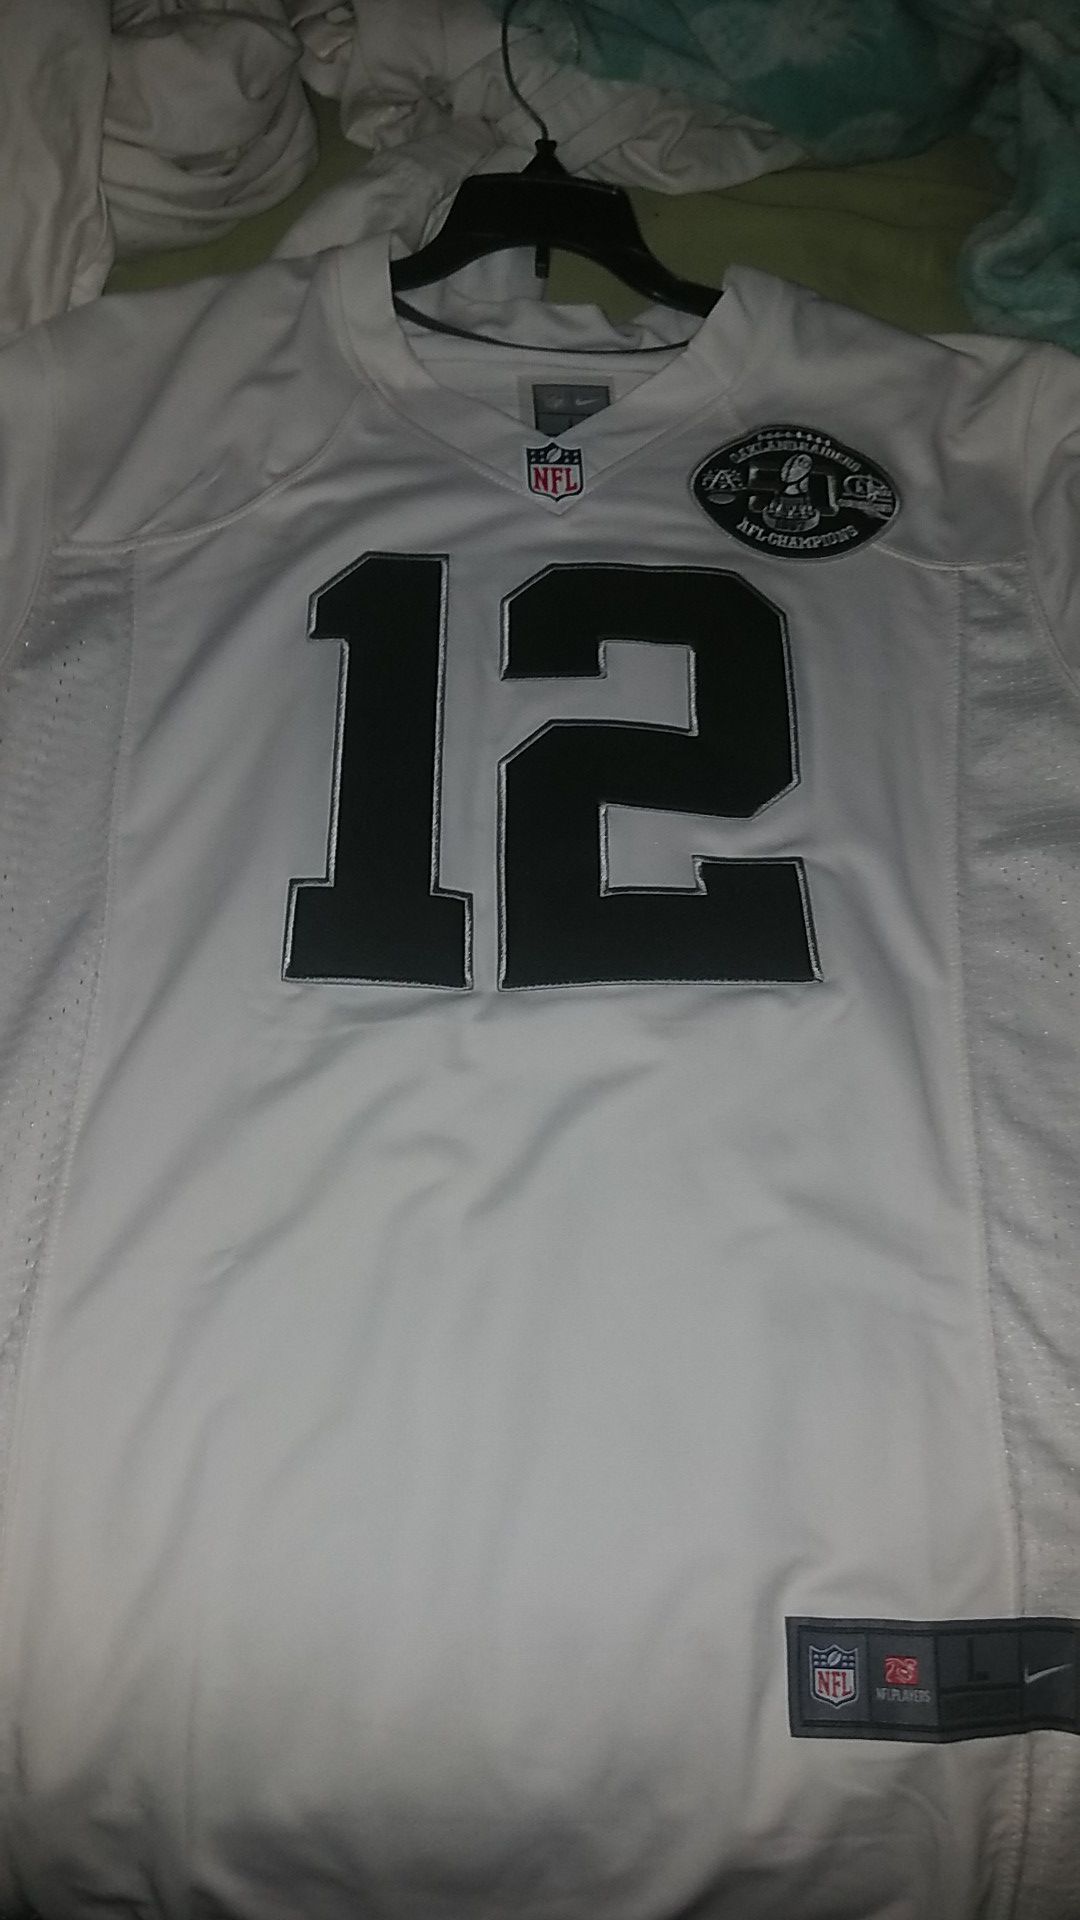 Stabler raiders jersey large